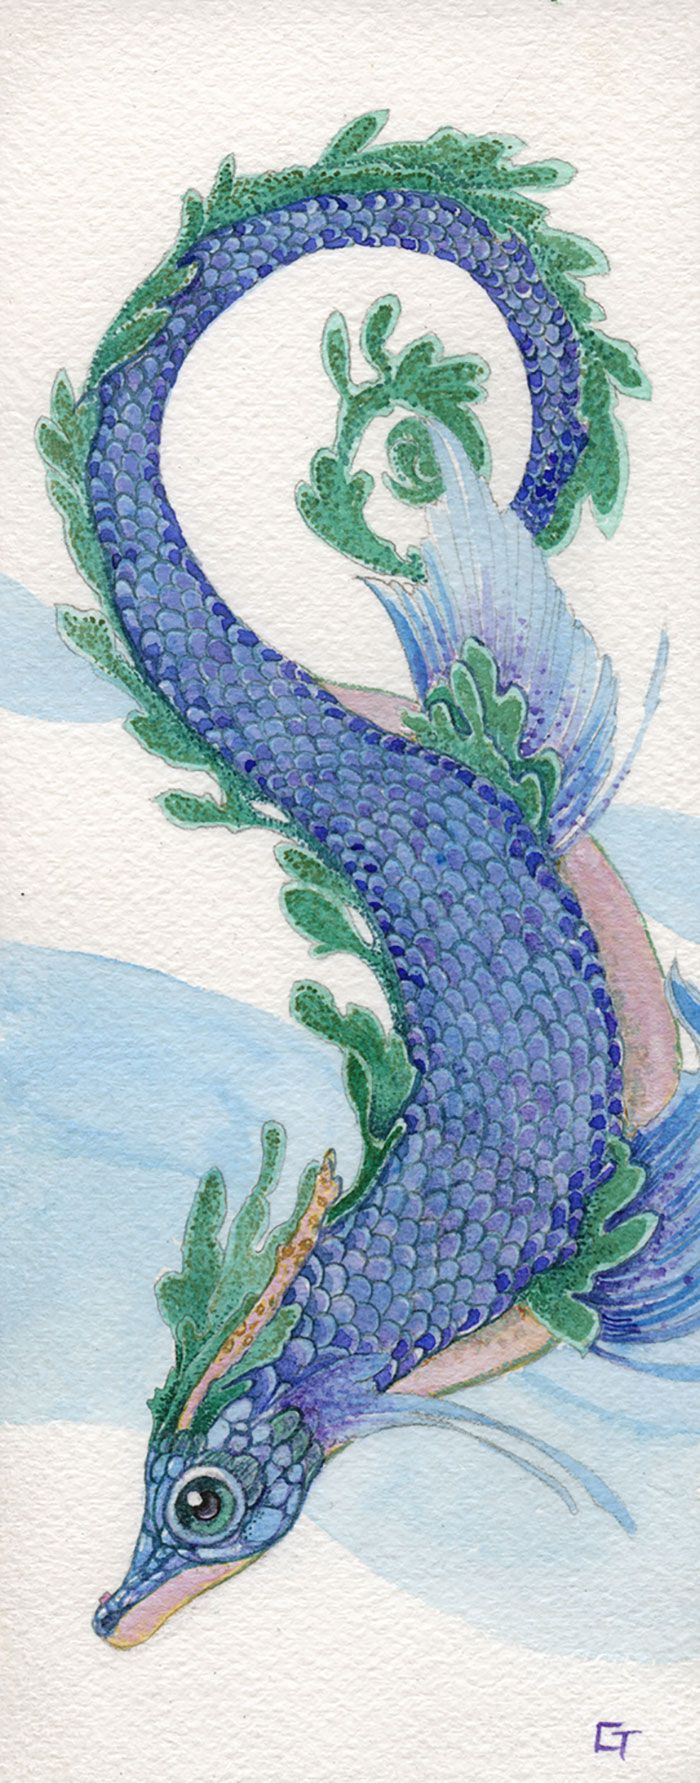 Unique And Wonderful Dragons Watercolors By Carrieann Truitt 8